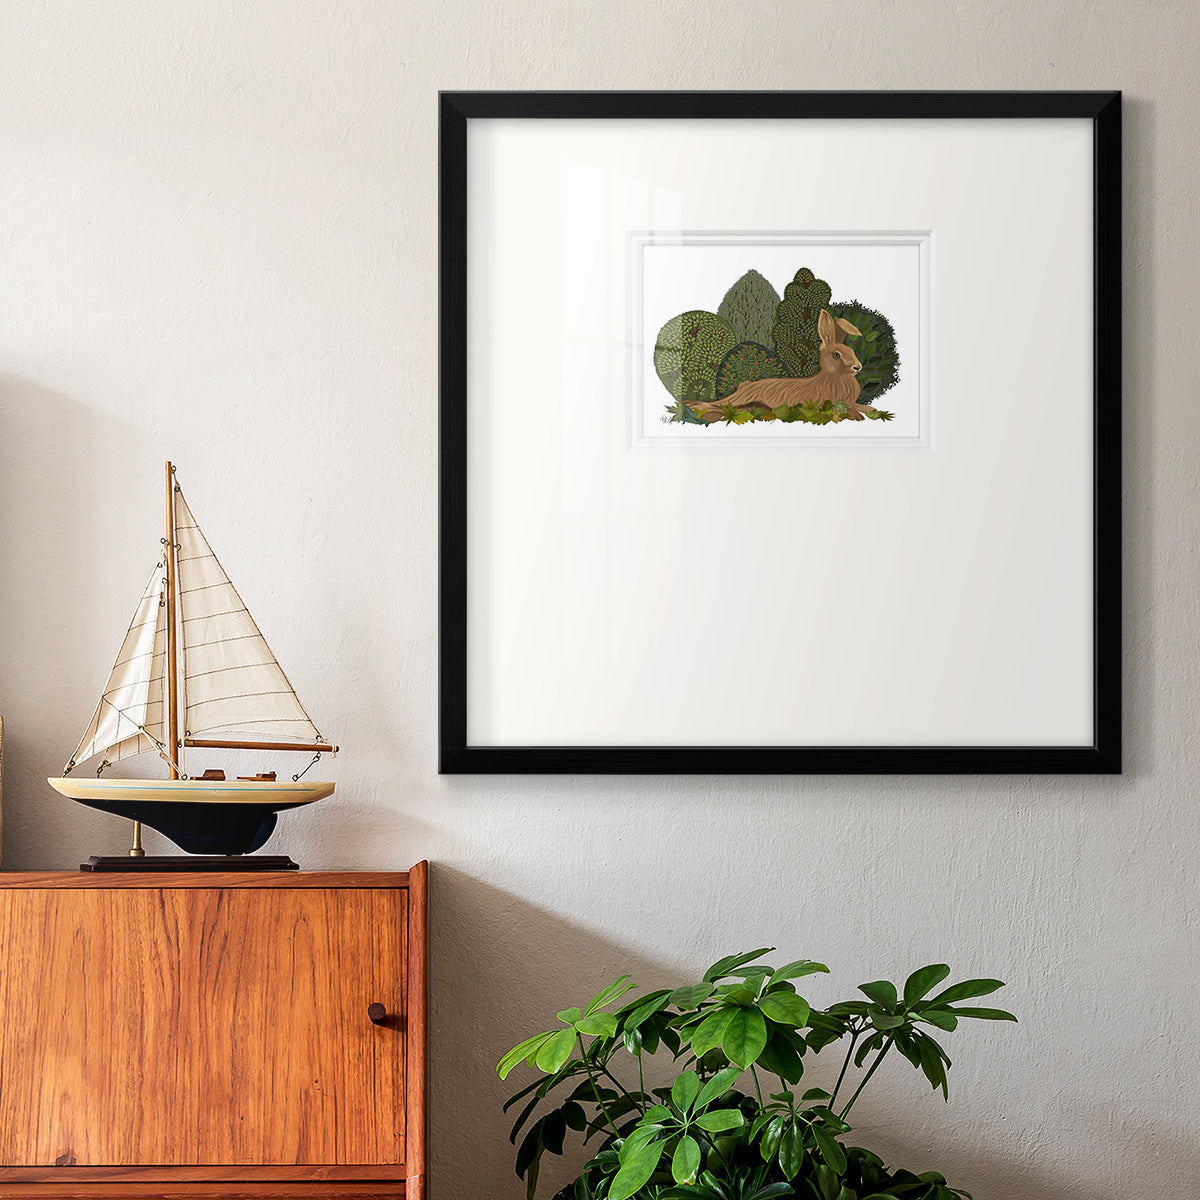 Hare Reclining in Leaves Premium Framed Print Double Matboard